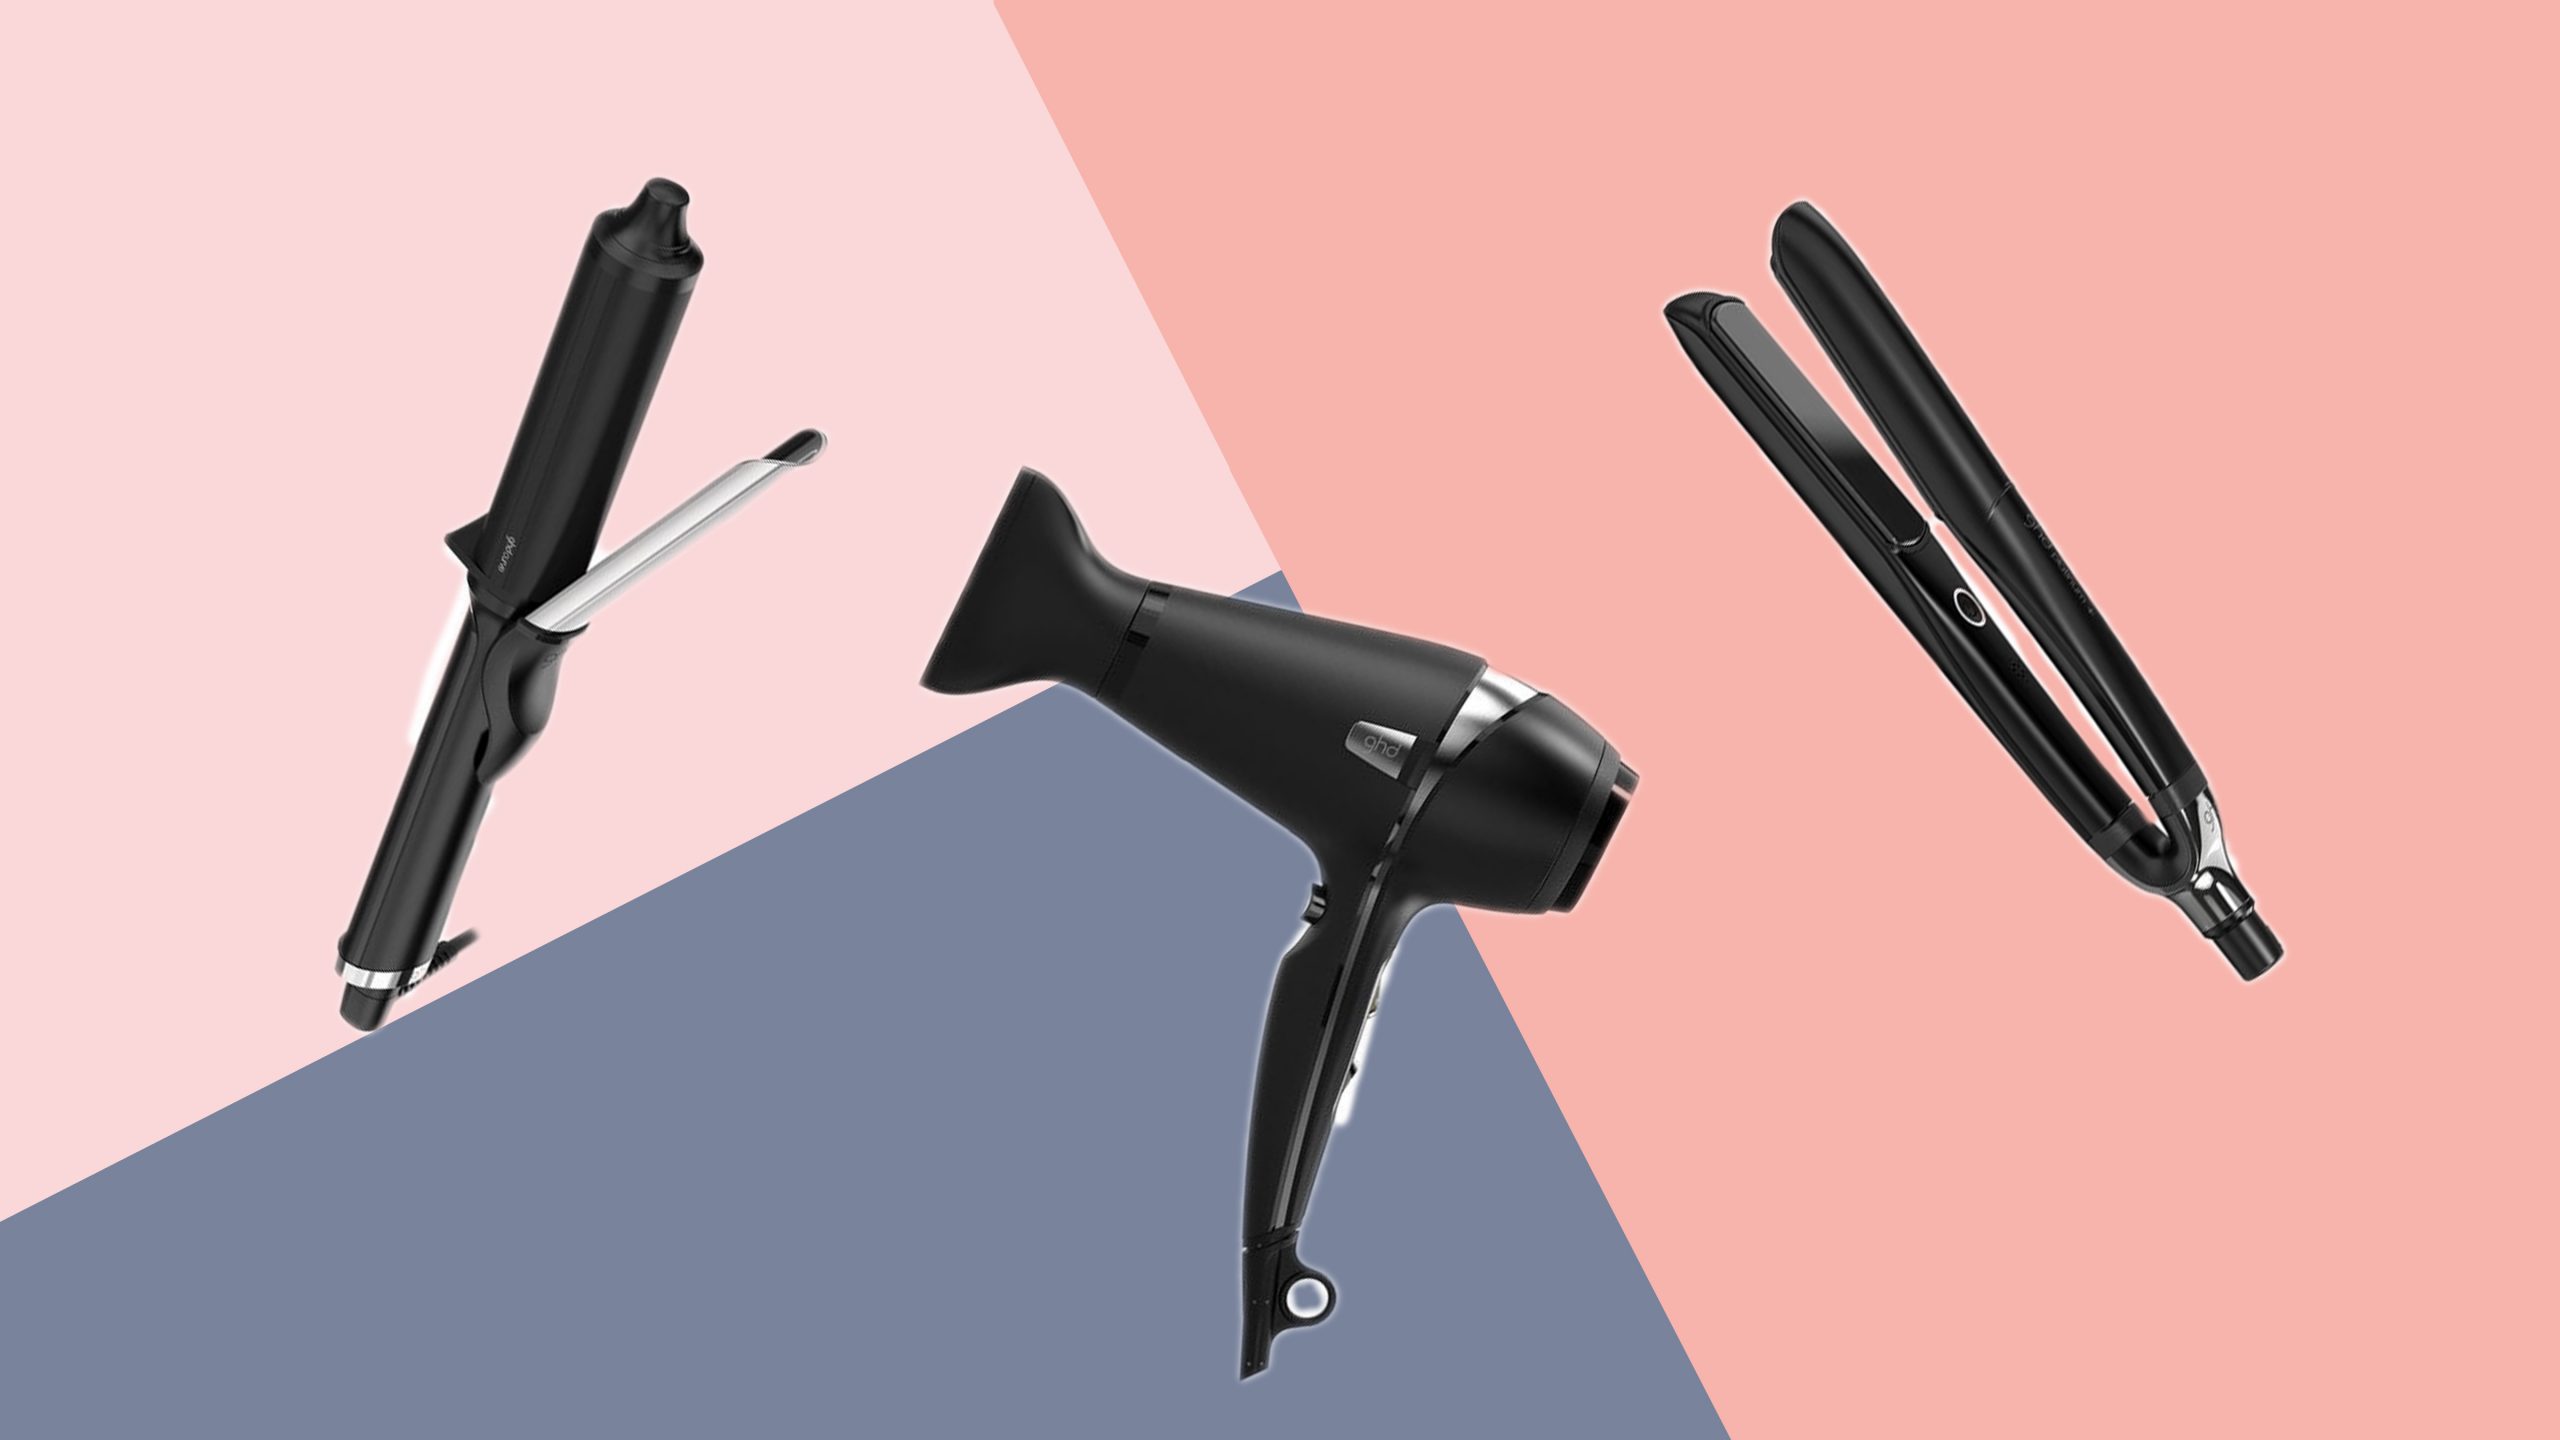 GHD sale UK: Cheap GHD straightener and hair dryer deals - mamabella